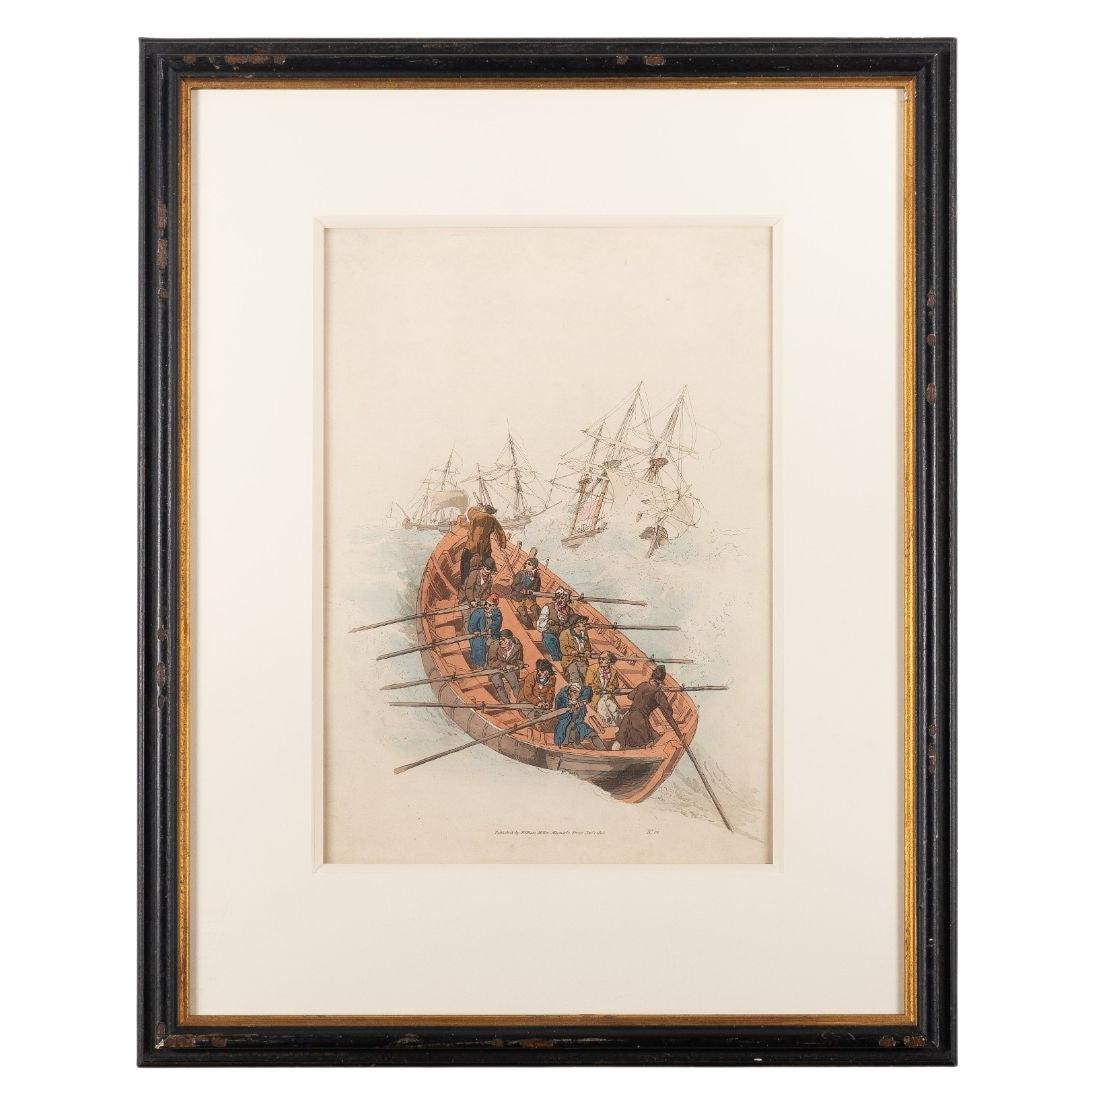 Hand Colored Engraving on Paper of Sailors in a Long Boat by William Miller